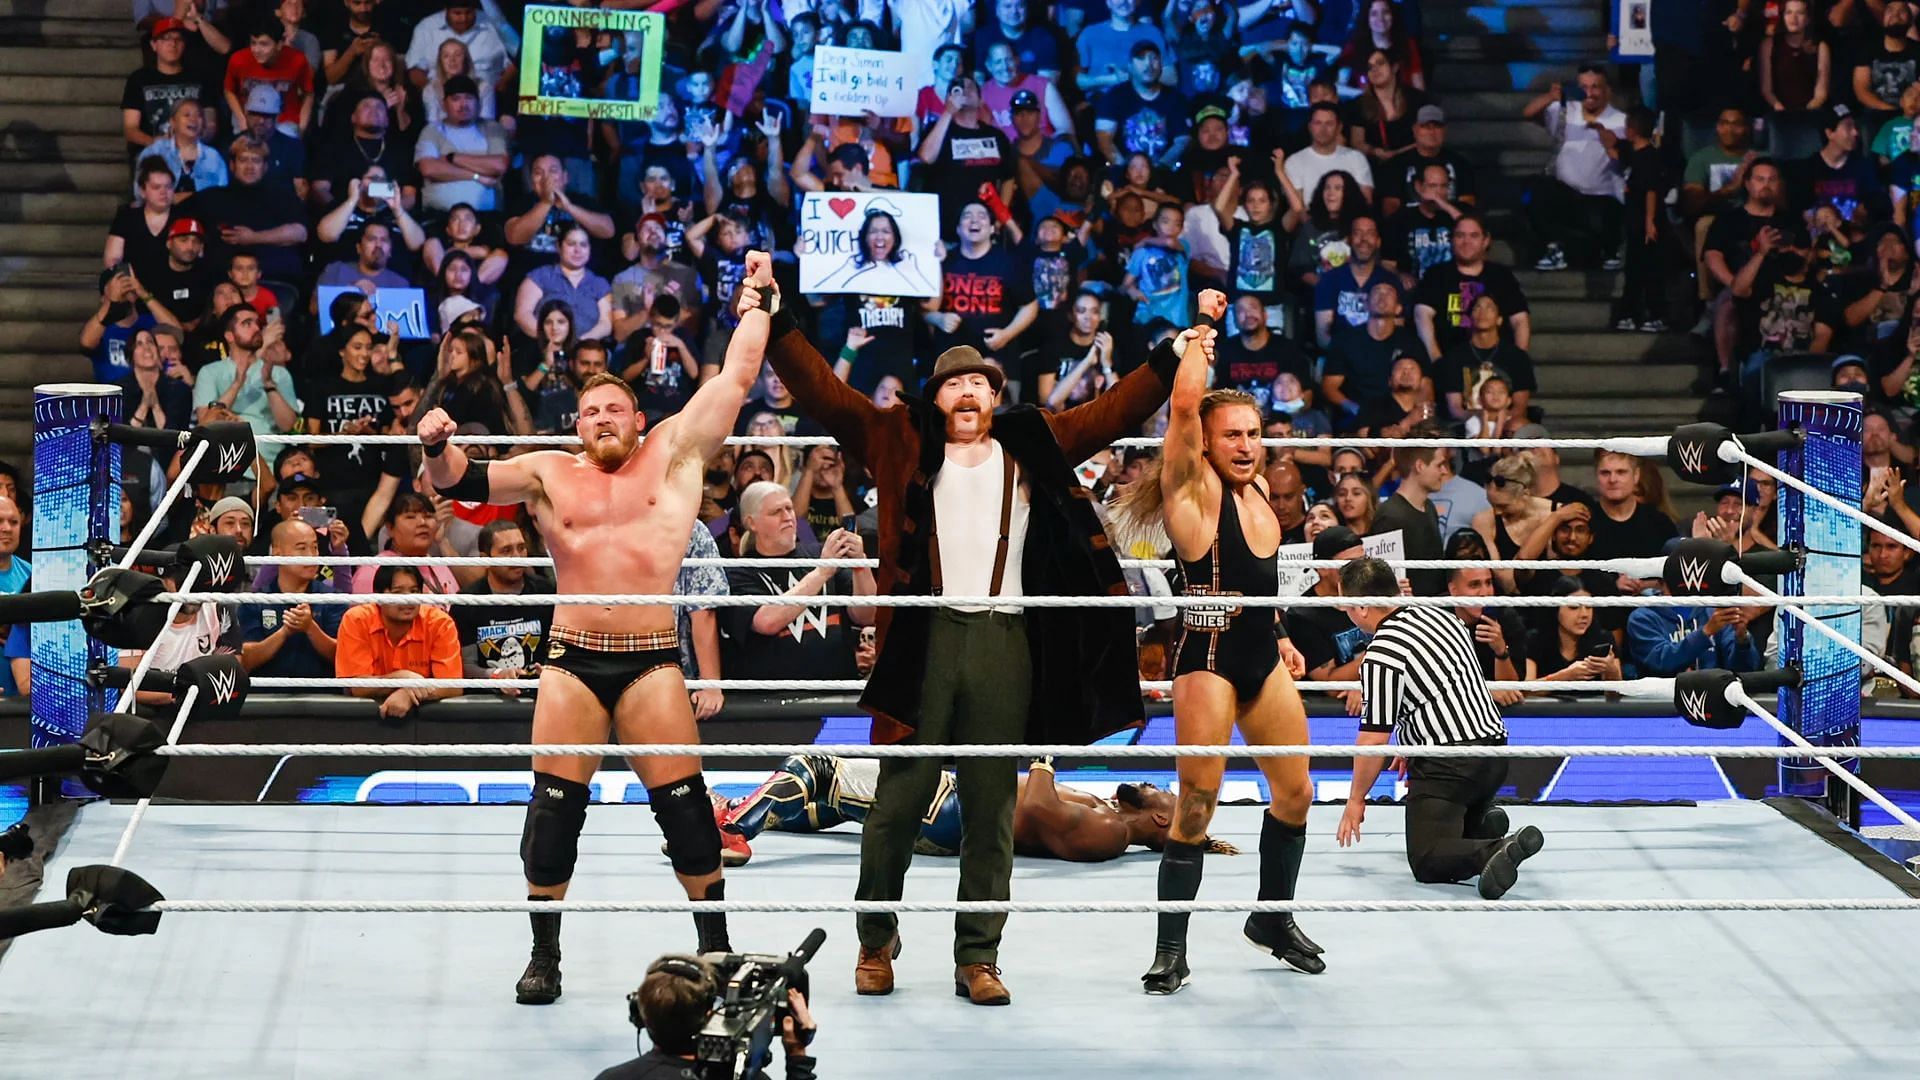 The Brawling Brutes battled The Bloodline is the inaugural Survivor Series Men